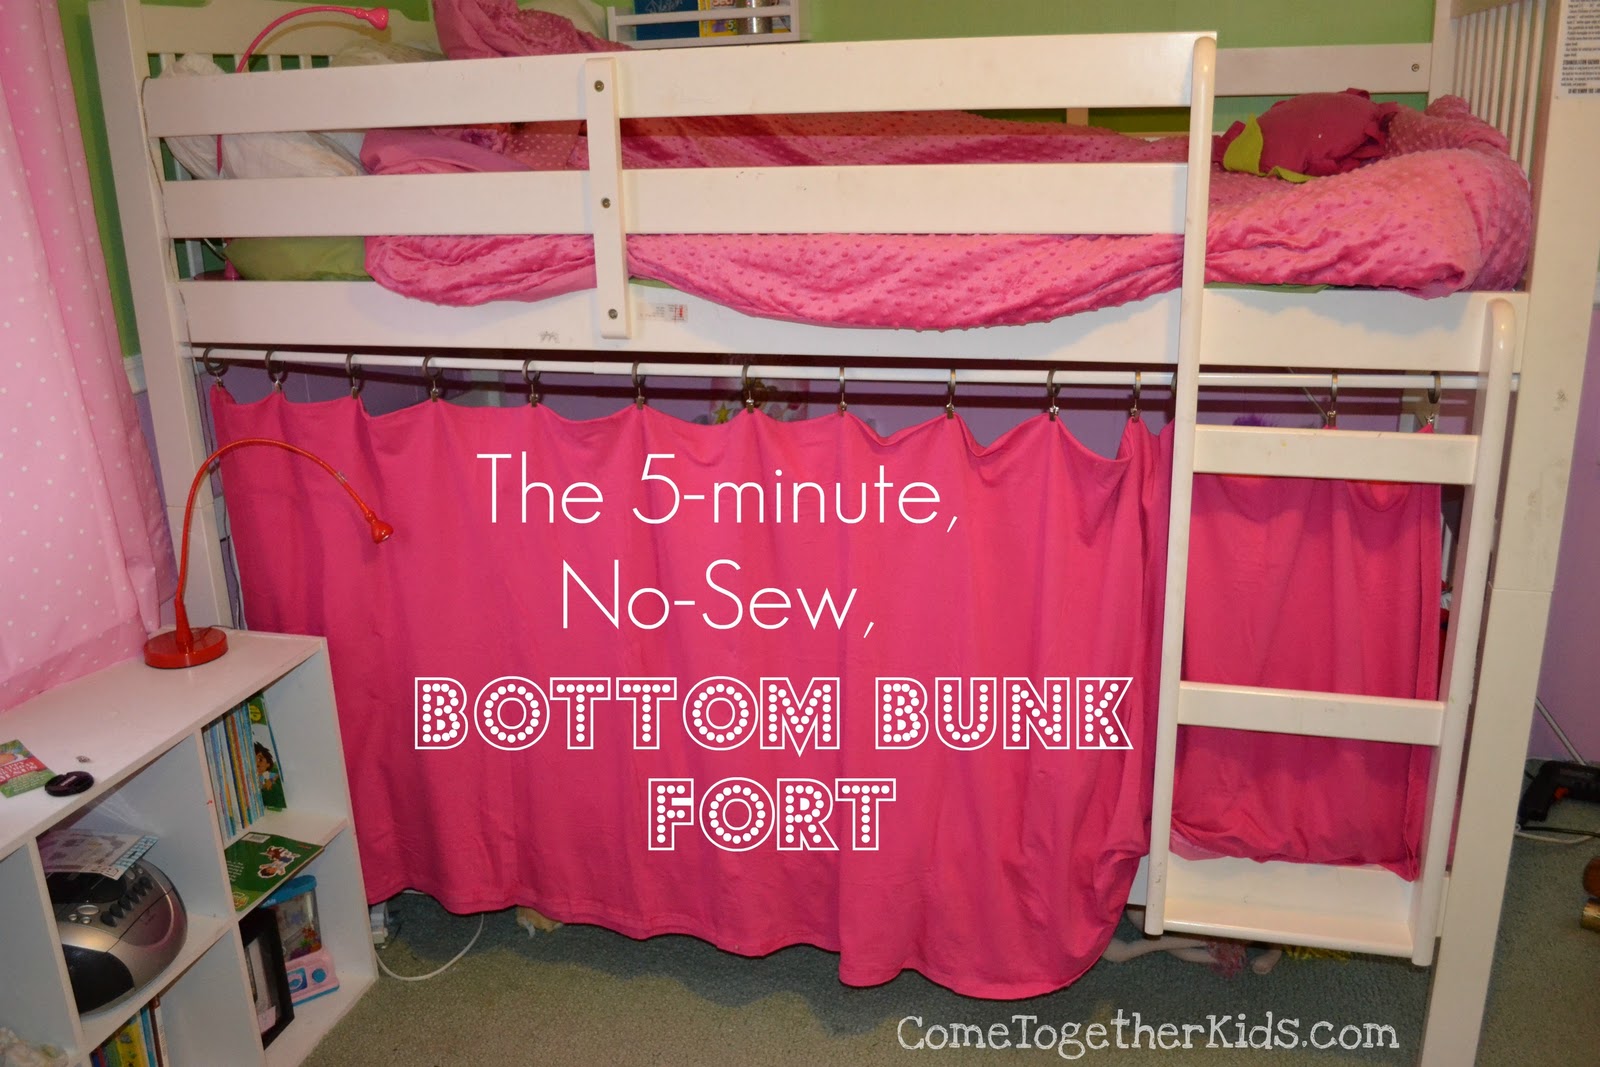 Kids The 5 Minute No Sew Bottom Bunk Fort, Top Bunk Bed Curtain Ideas